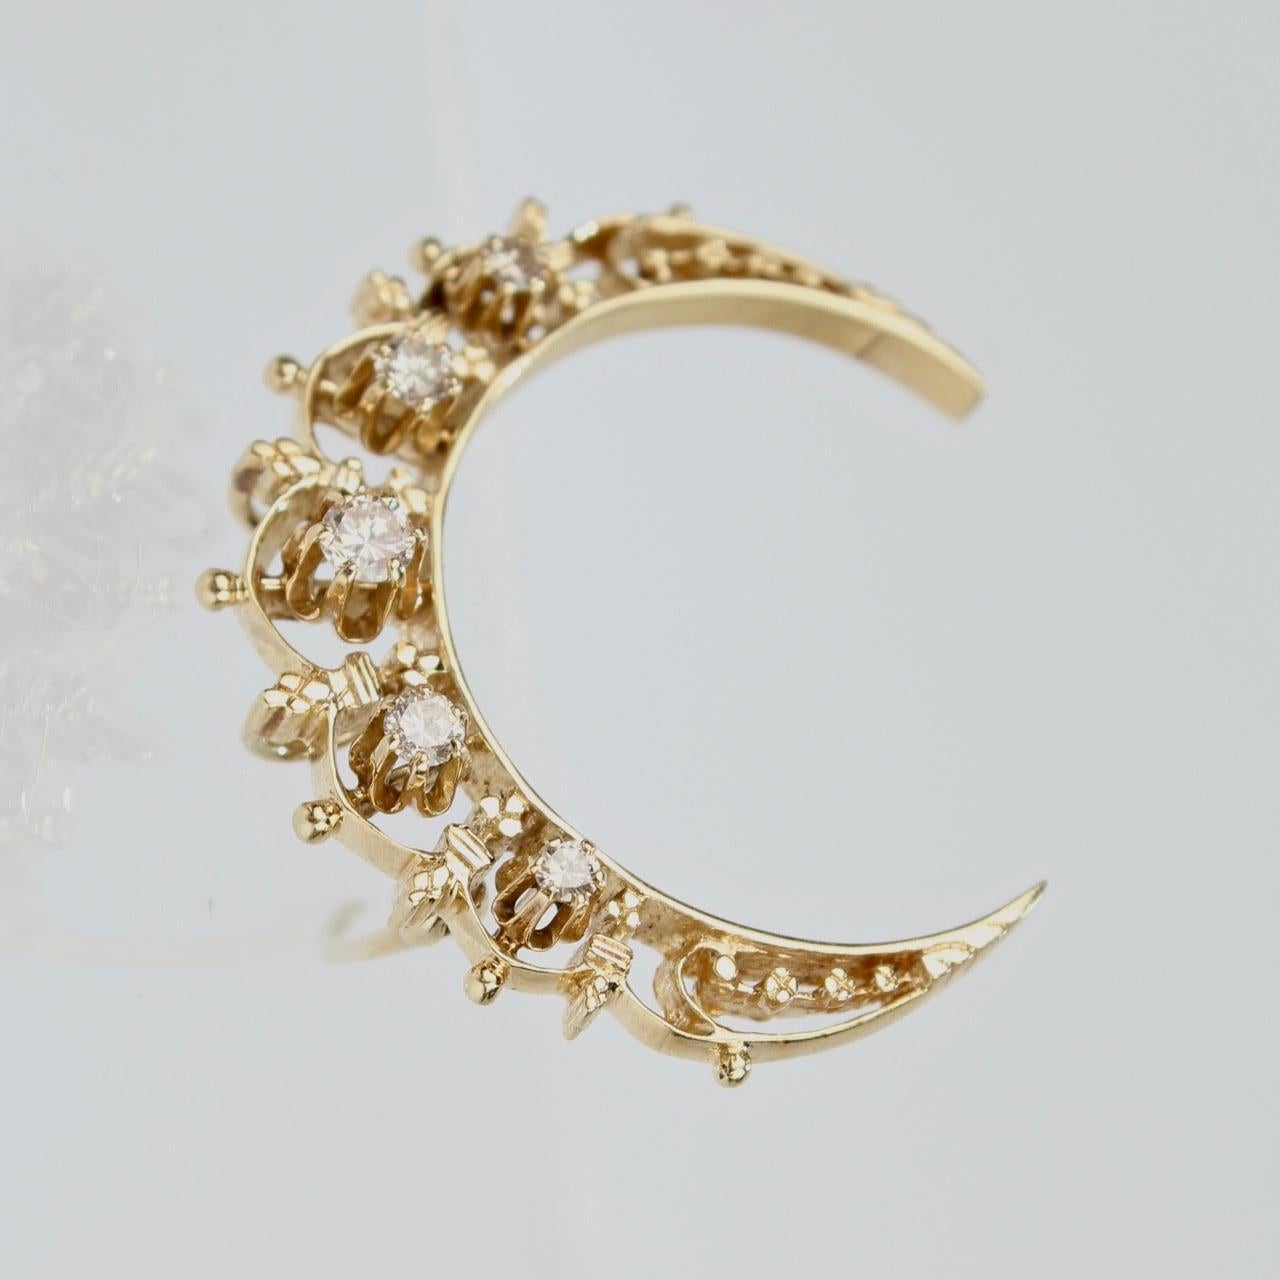 A beautifully crafted, antique 14k gold Victorian crescent moon-shaped convertible brooch and pendant.

Symbolically, the crescent moon is a harbinger of new things to come. Both waxing or waning, the crescent moon symbolizes Femininity, intuition,